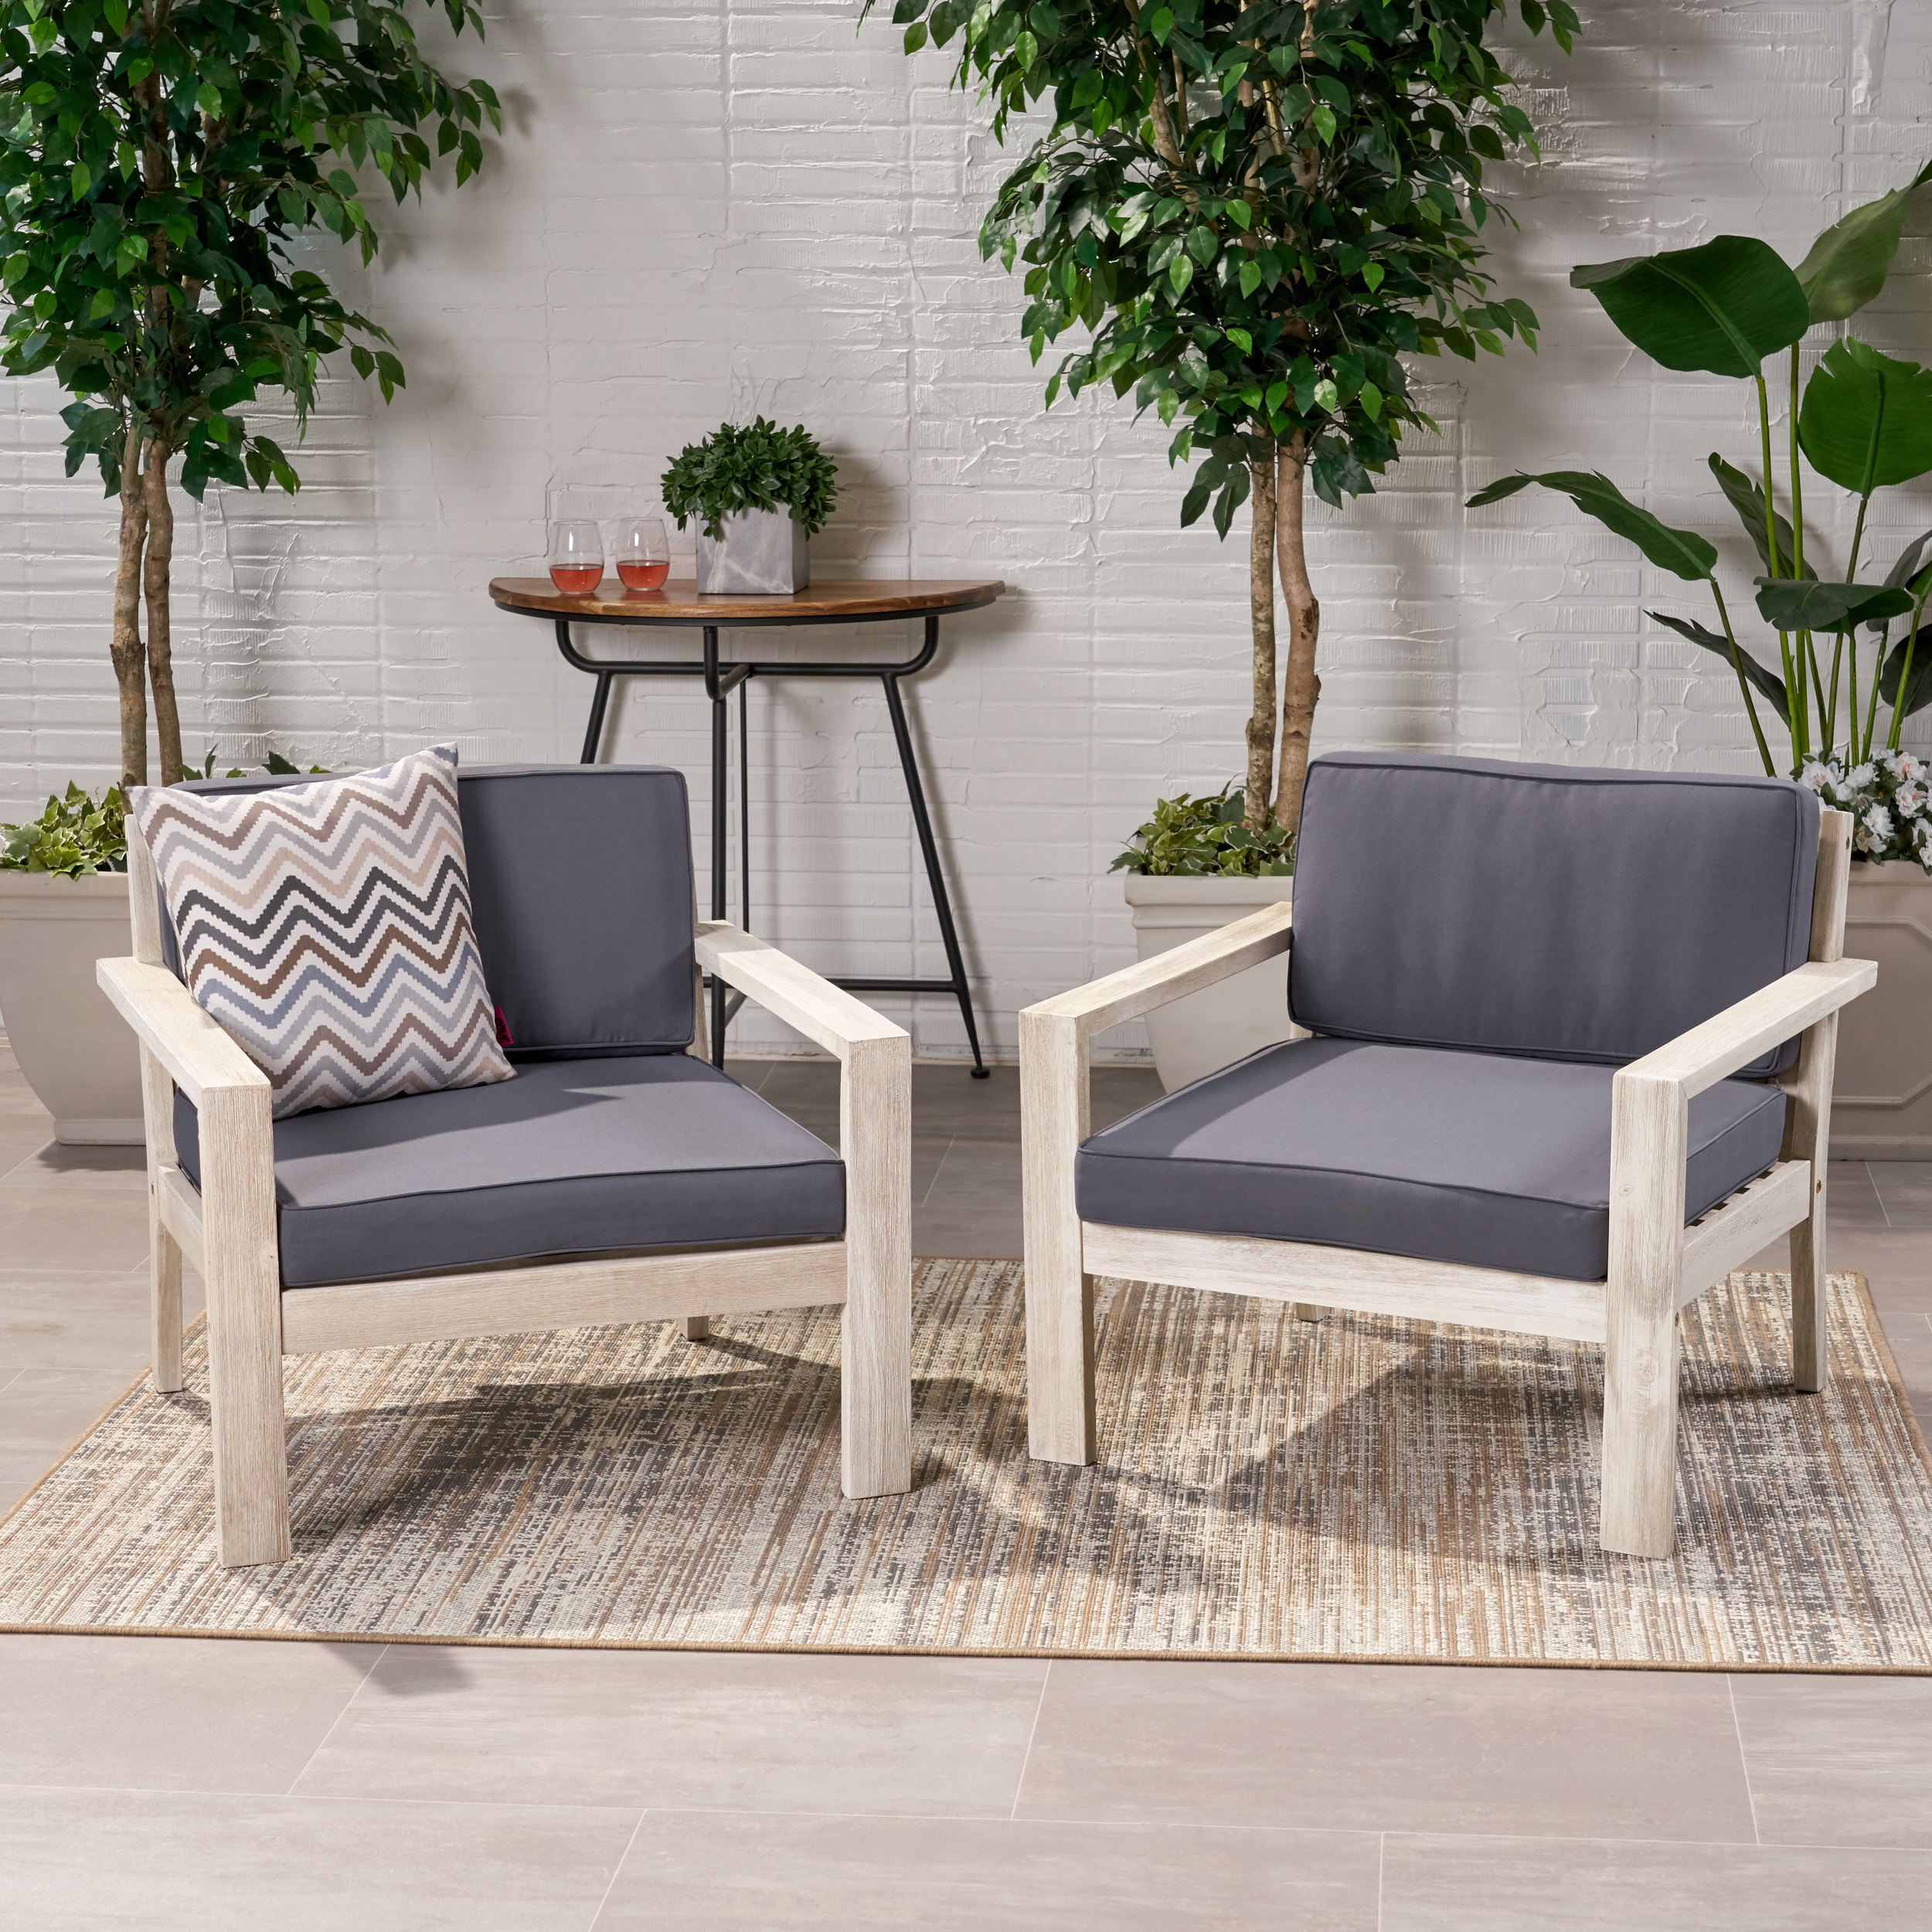 Beryl Outdoor Acacia Wood Club Chairs With Cushions (Set Of 2) - Brushed Light Gray Wash, Light Gray